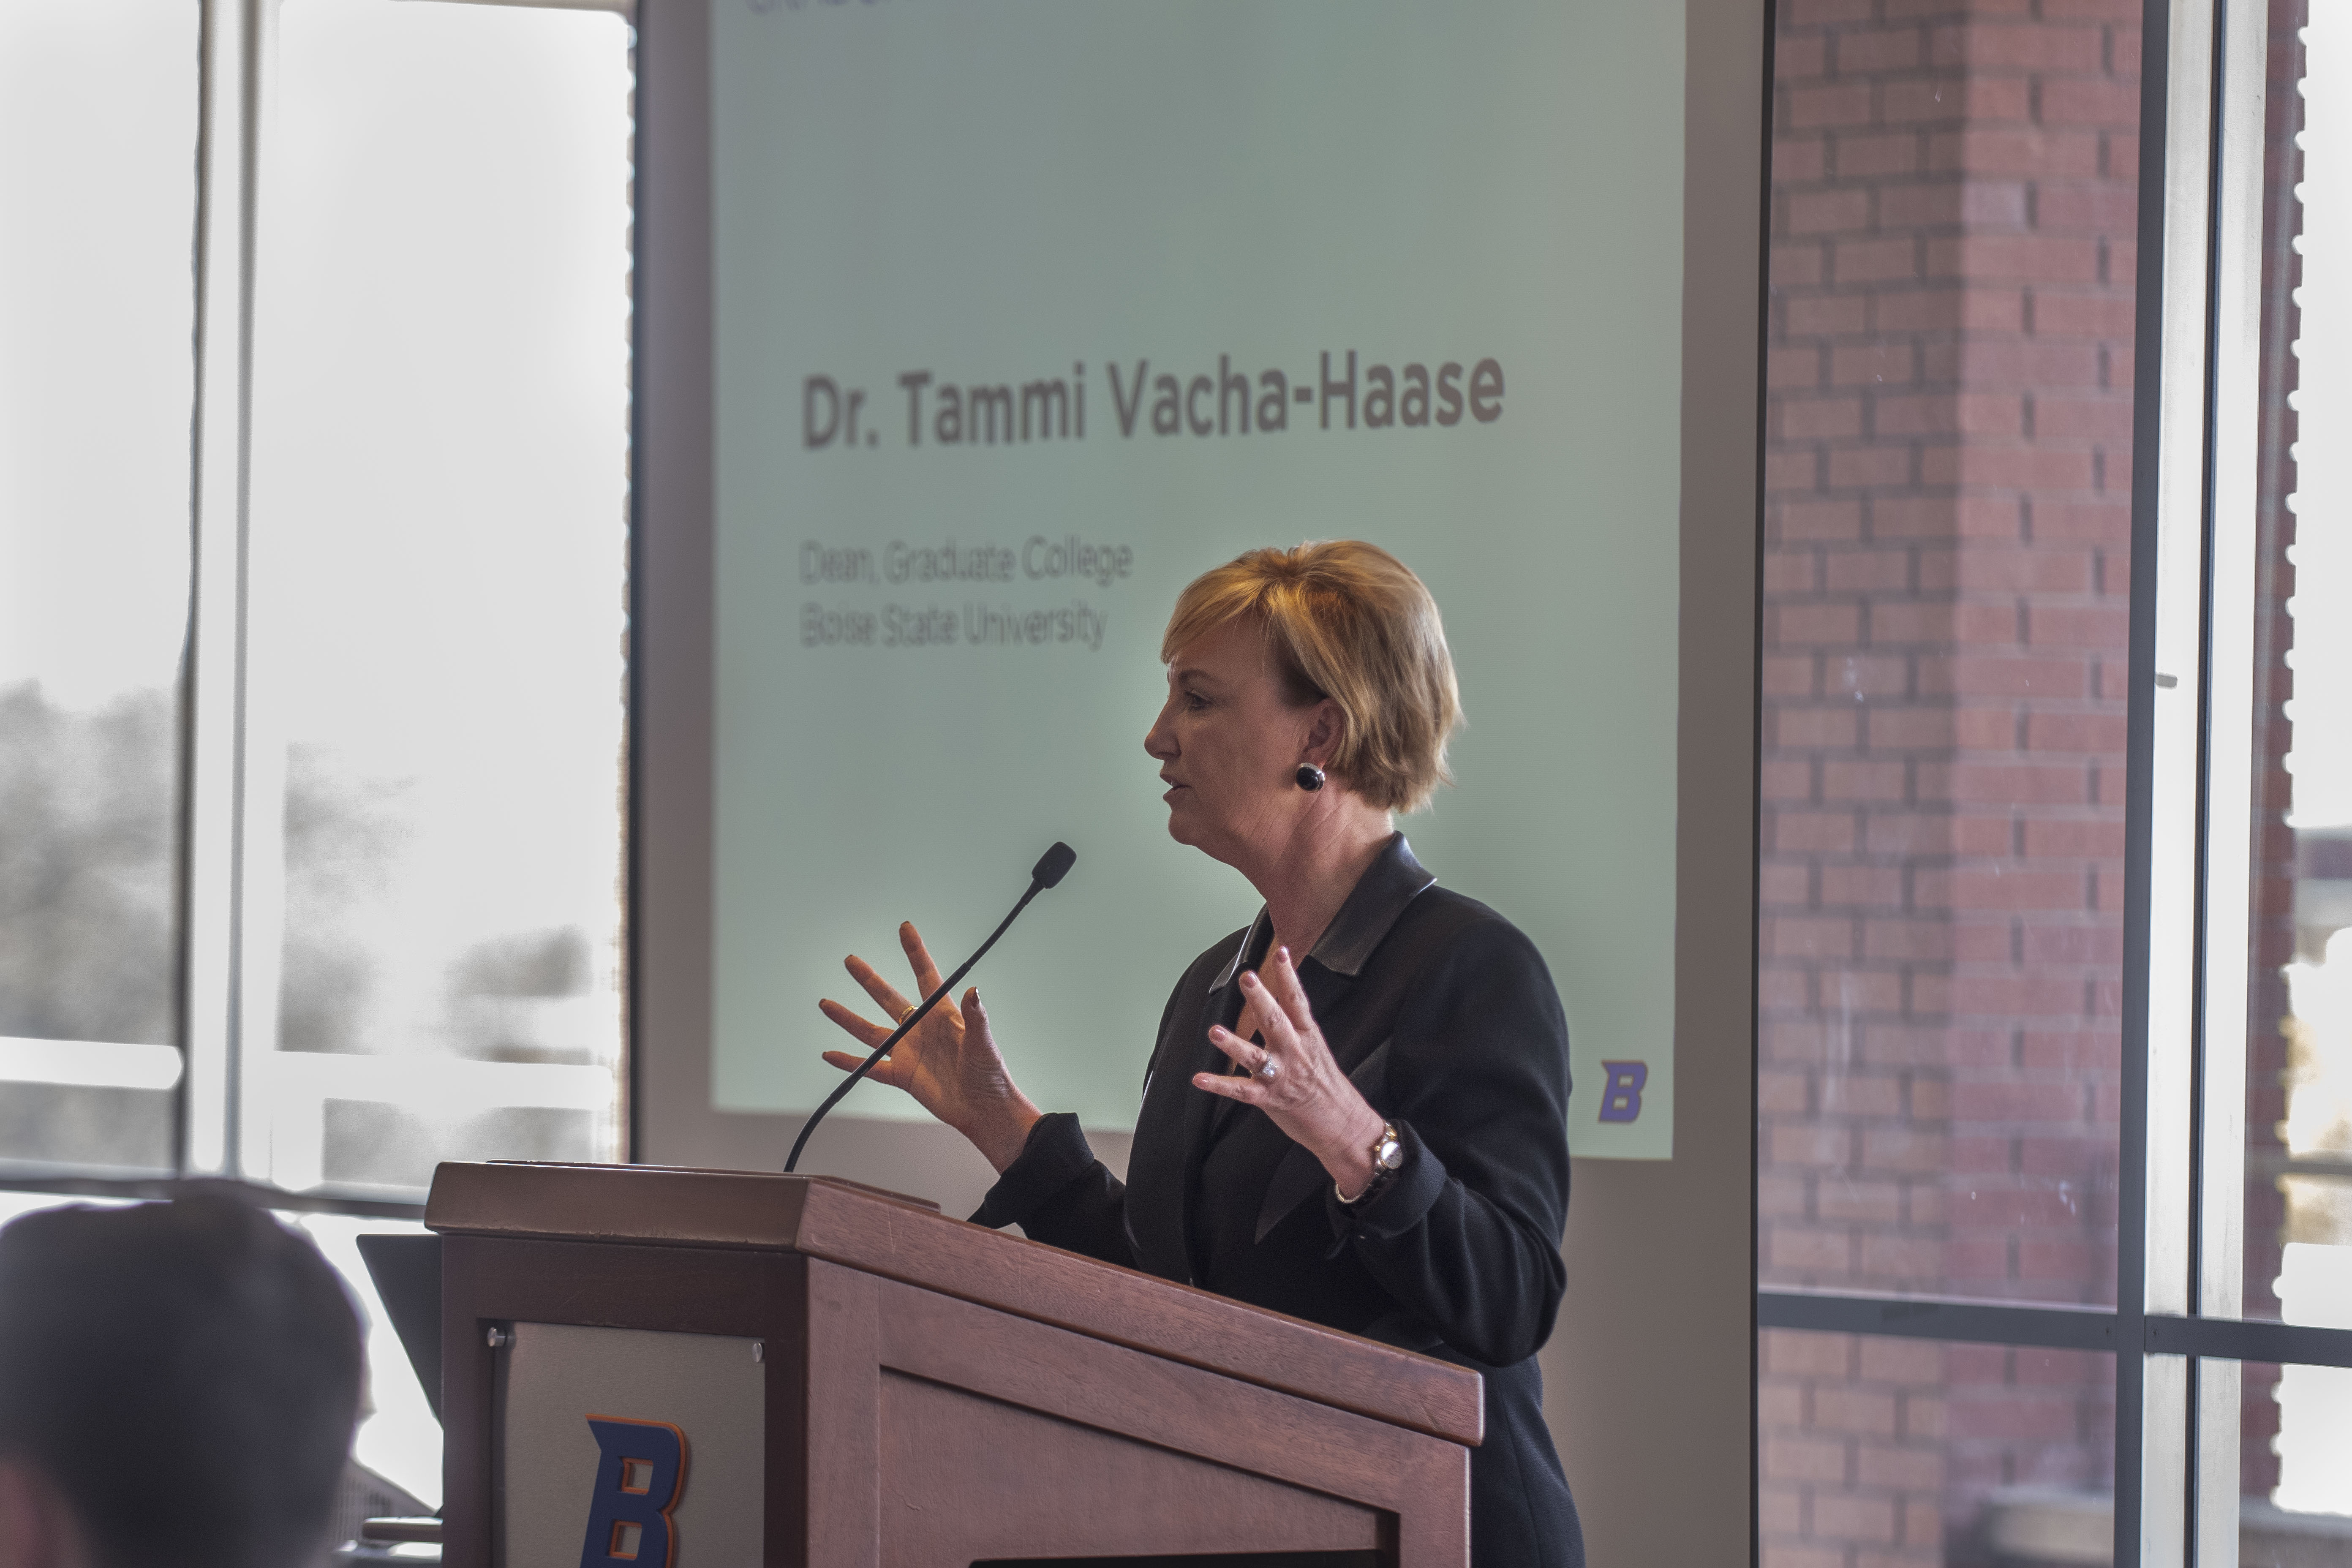 Tammi Vacha-Haase, dean of the Graduate College speaking at the Graduate Awards Ceremony.